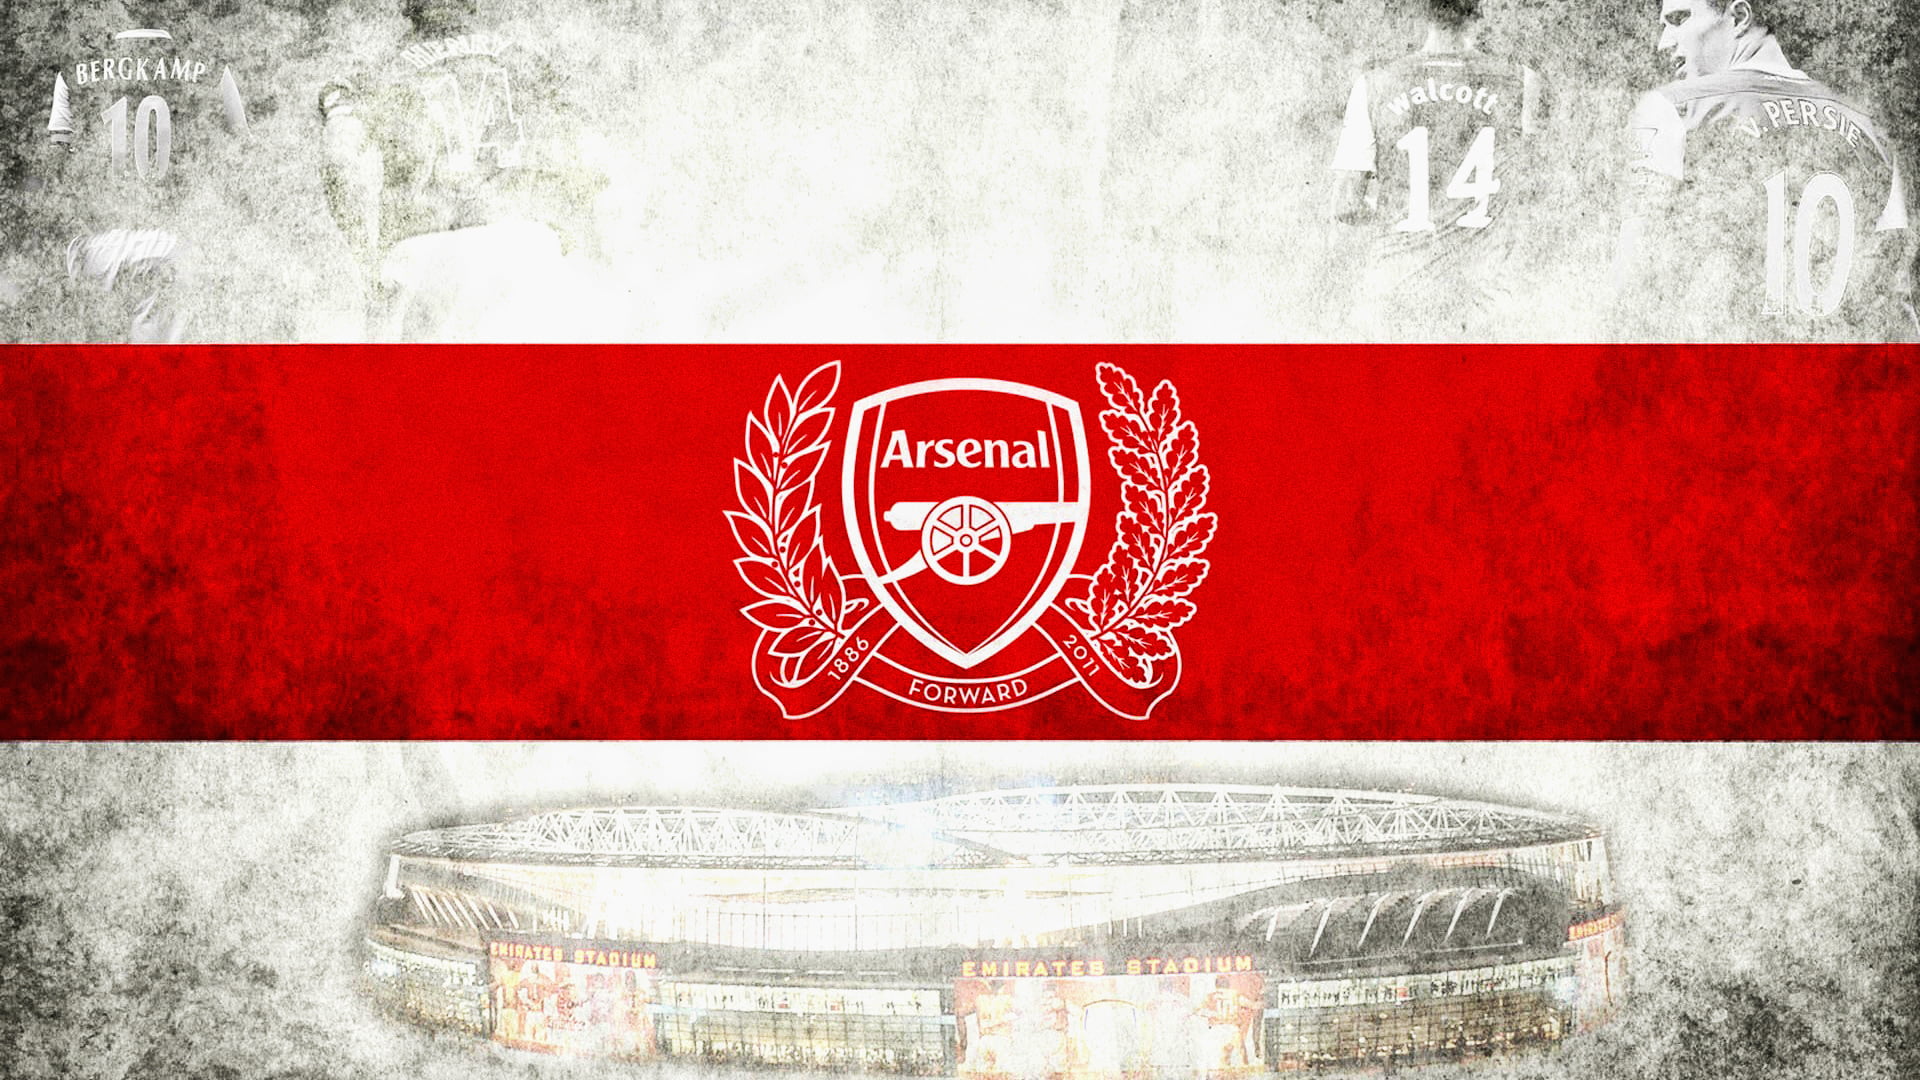 club, Logo, Arsenal, Football, red, no people, wall - building feature